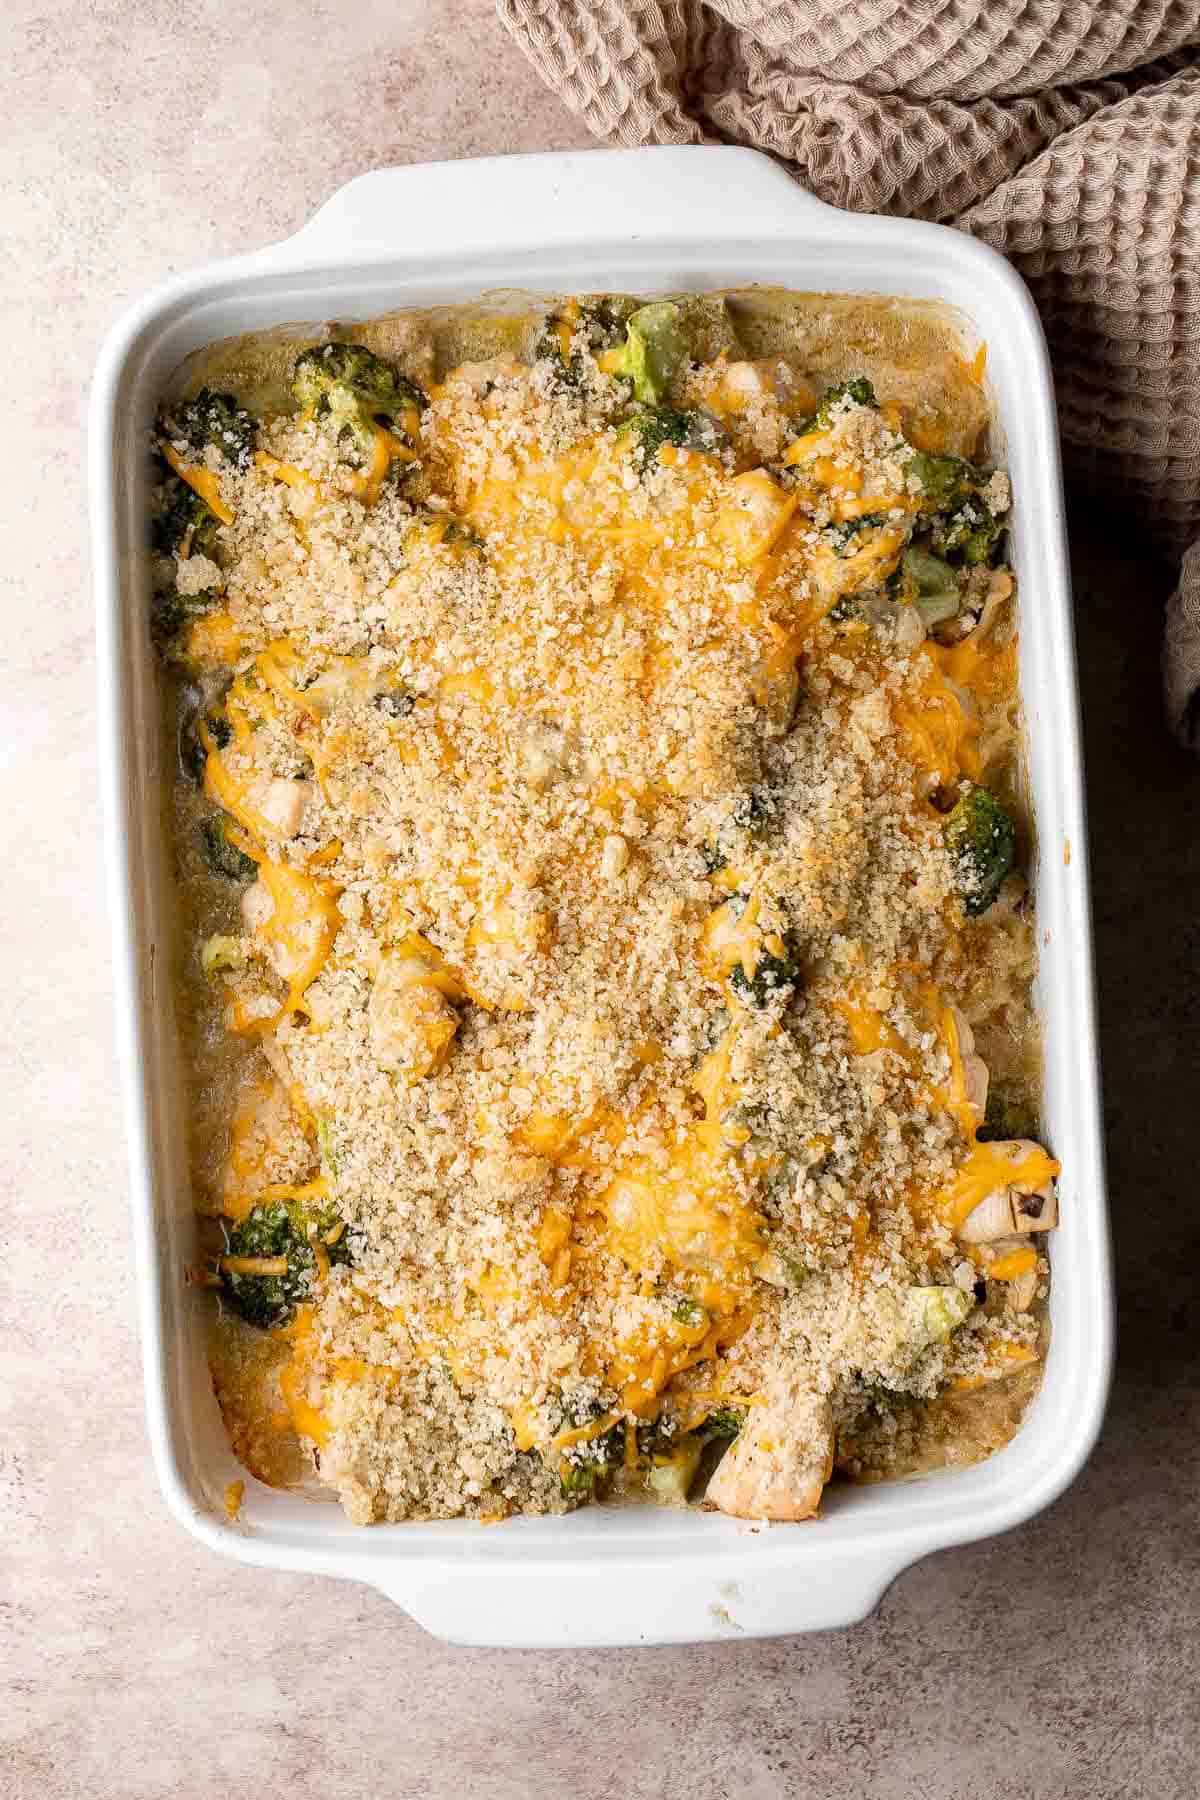 Chicken Divan is a deliciously creamy casserole made with tender chicken and cheesy broccoli, baked with breadcrumbs. It's warm and cozy comfort food. | aheadofthyme.com